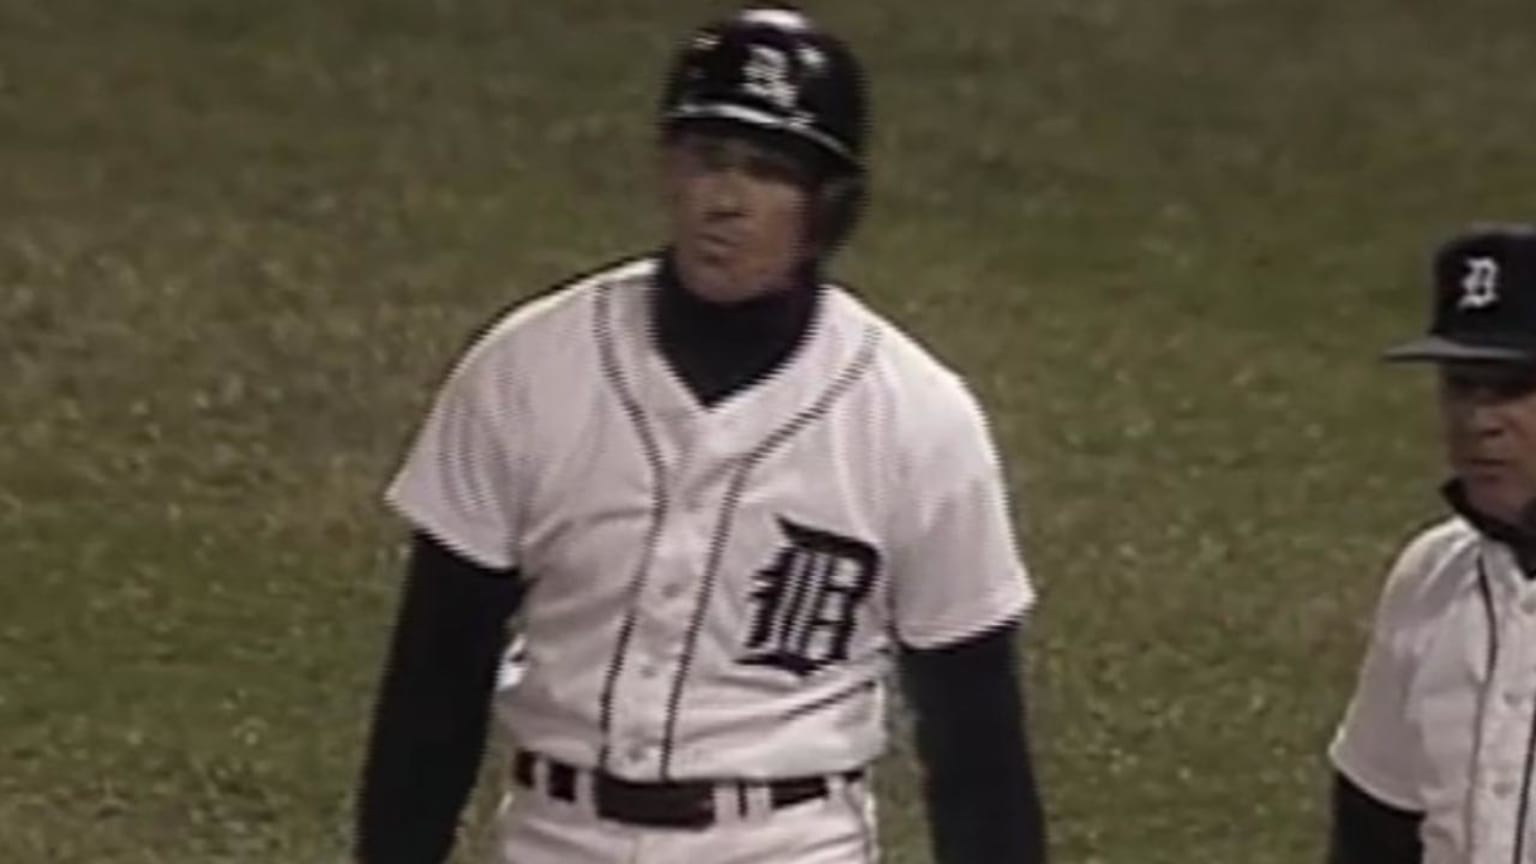 Trammell's 200th hit of 1987 | 10/01/1987 | MLB.com